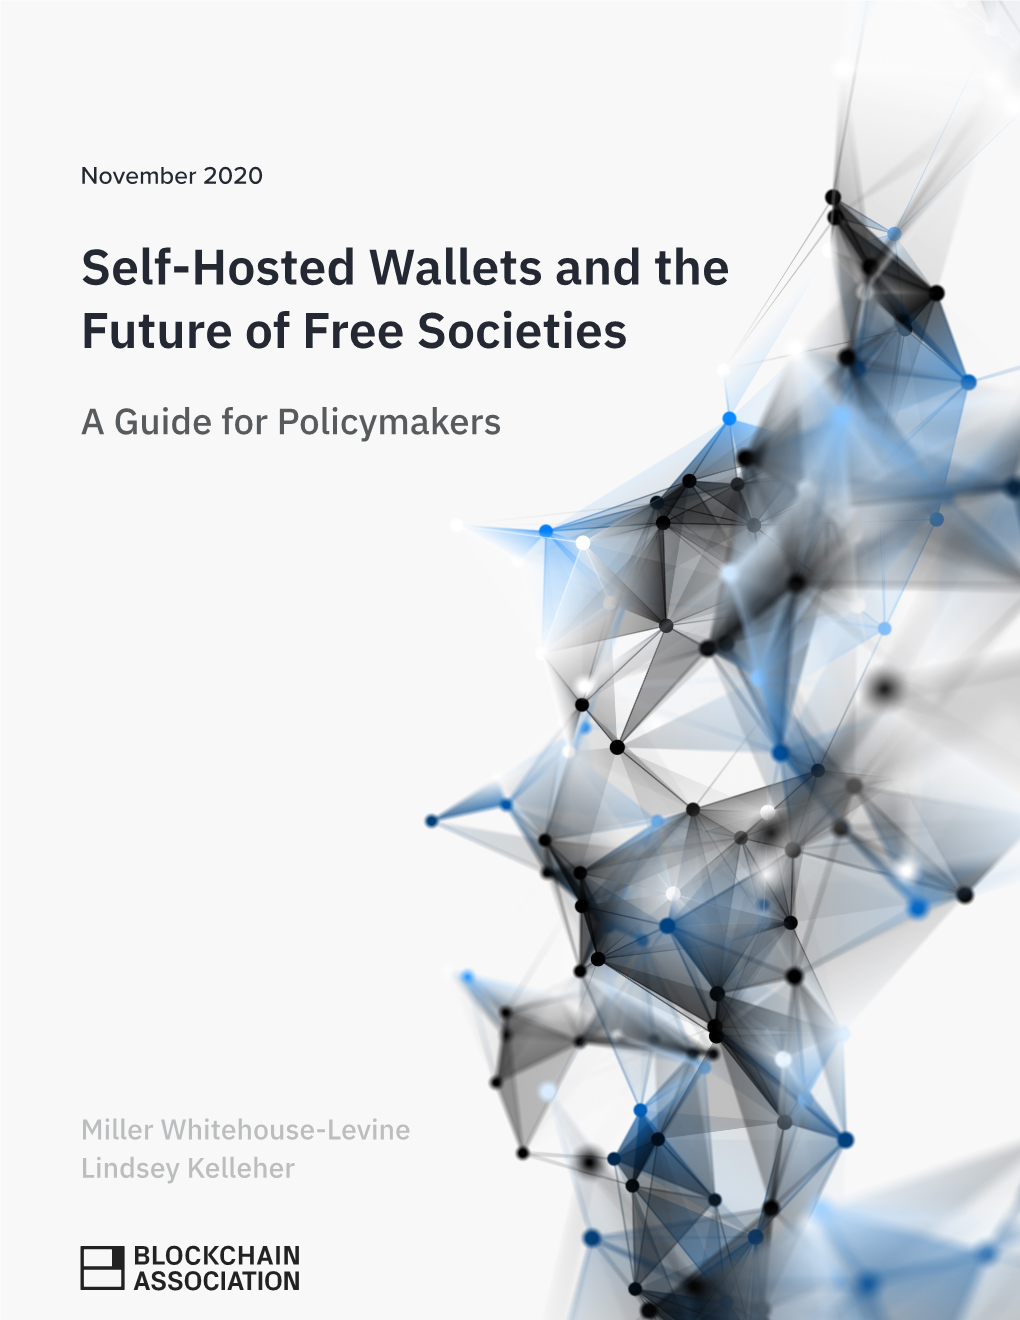 Self-Hosted Wallets and the Future of Free Societies